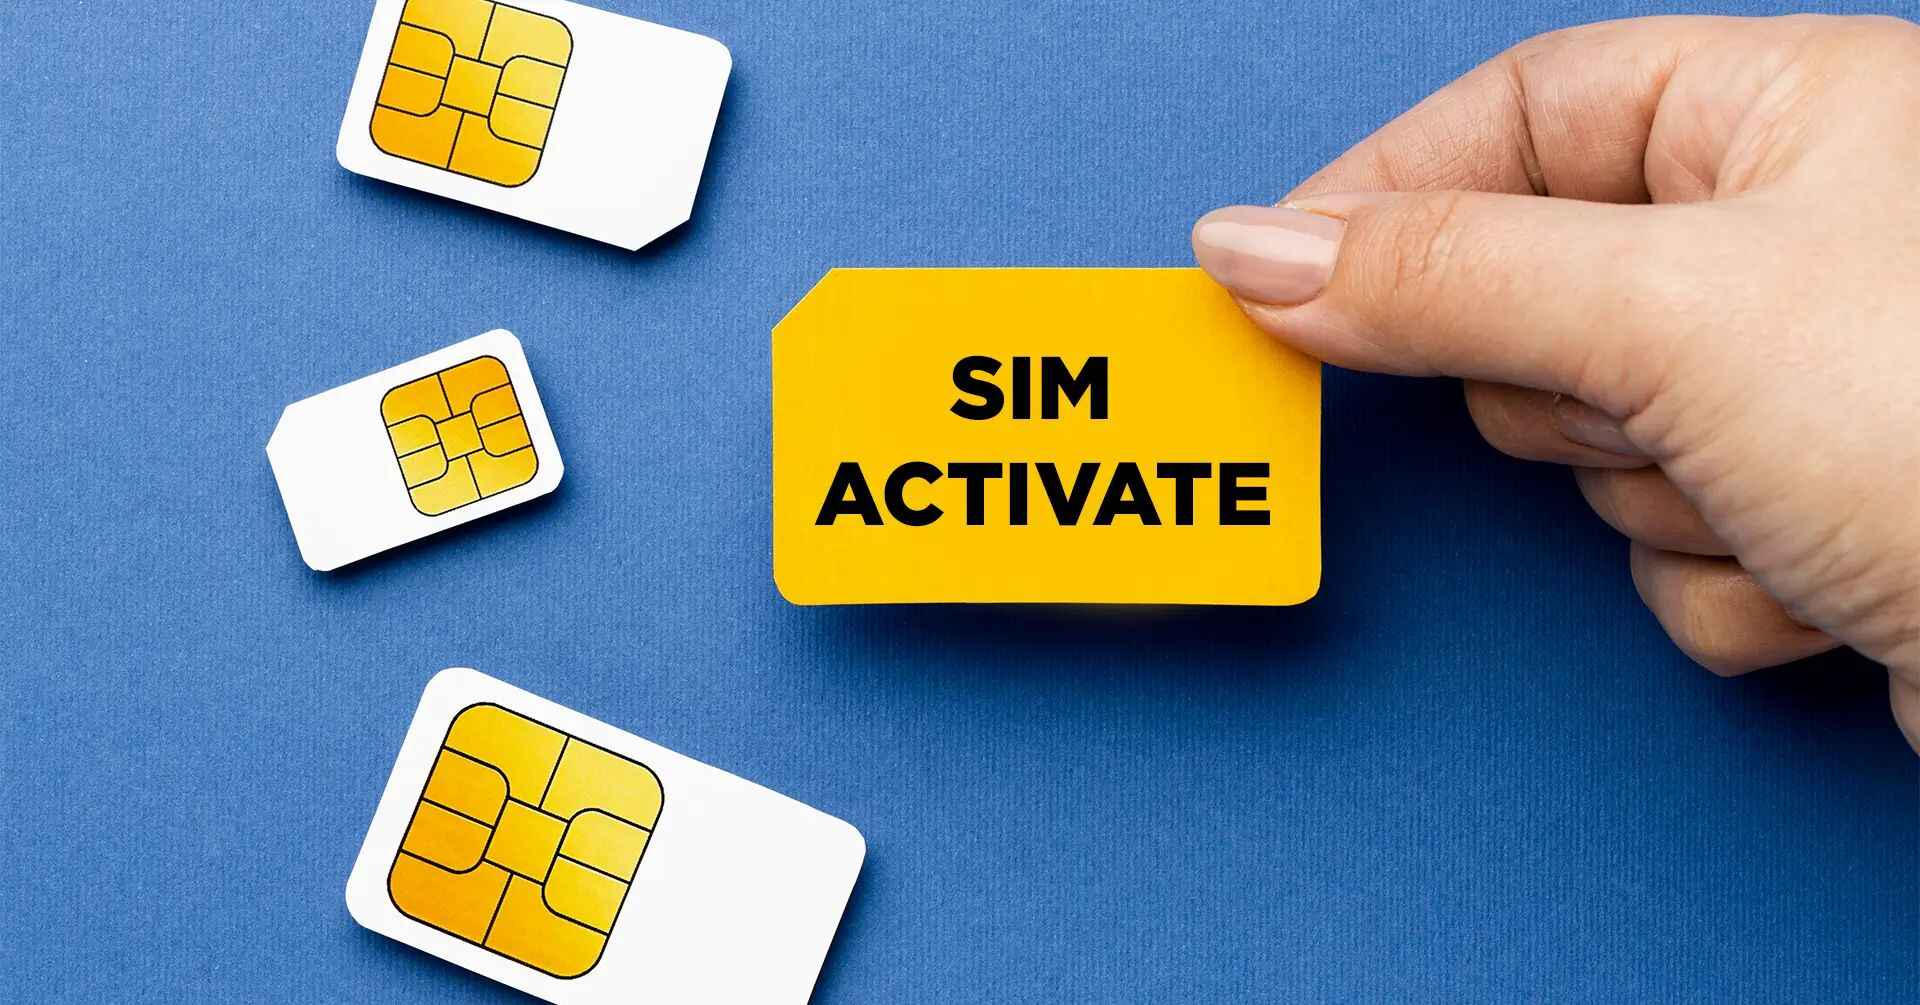 Activating Your AT&T SIM Card: A Step-by-Step Guide